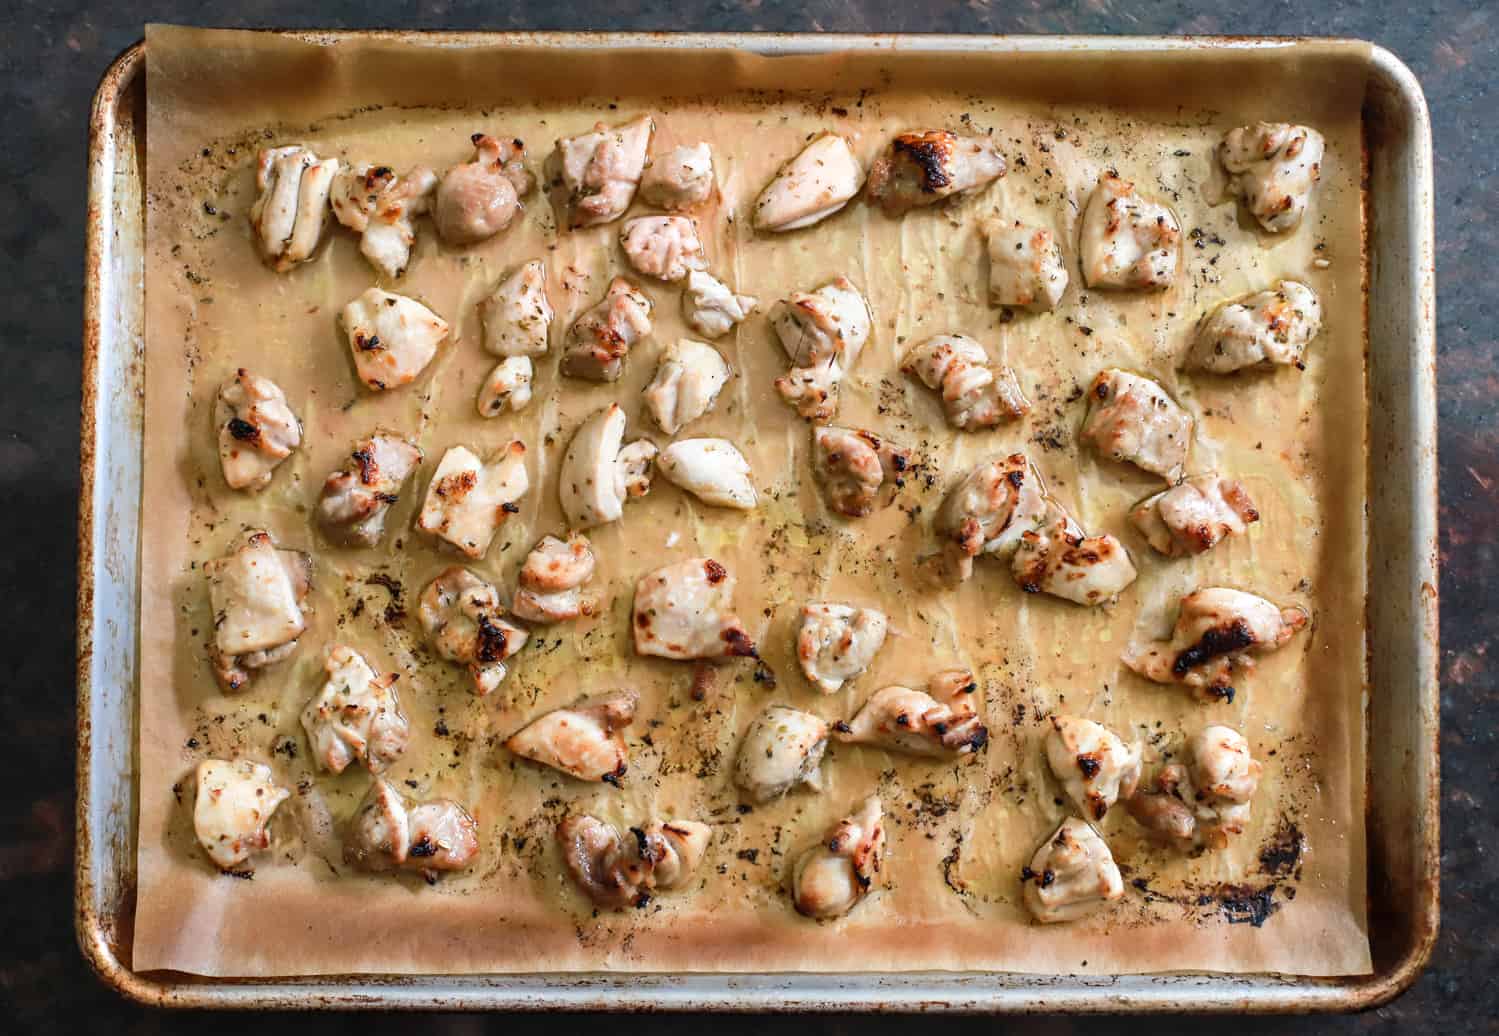 sheet pan of honey lemon chicken thigh pieces broiled with oregano.